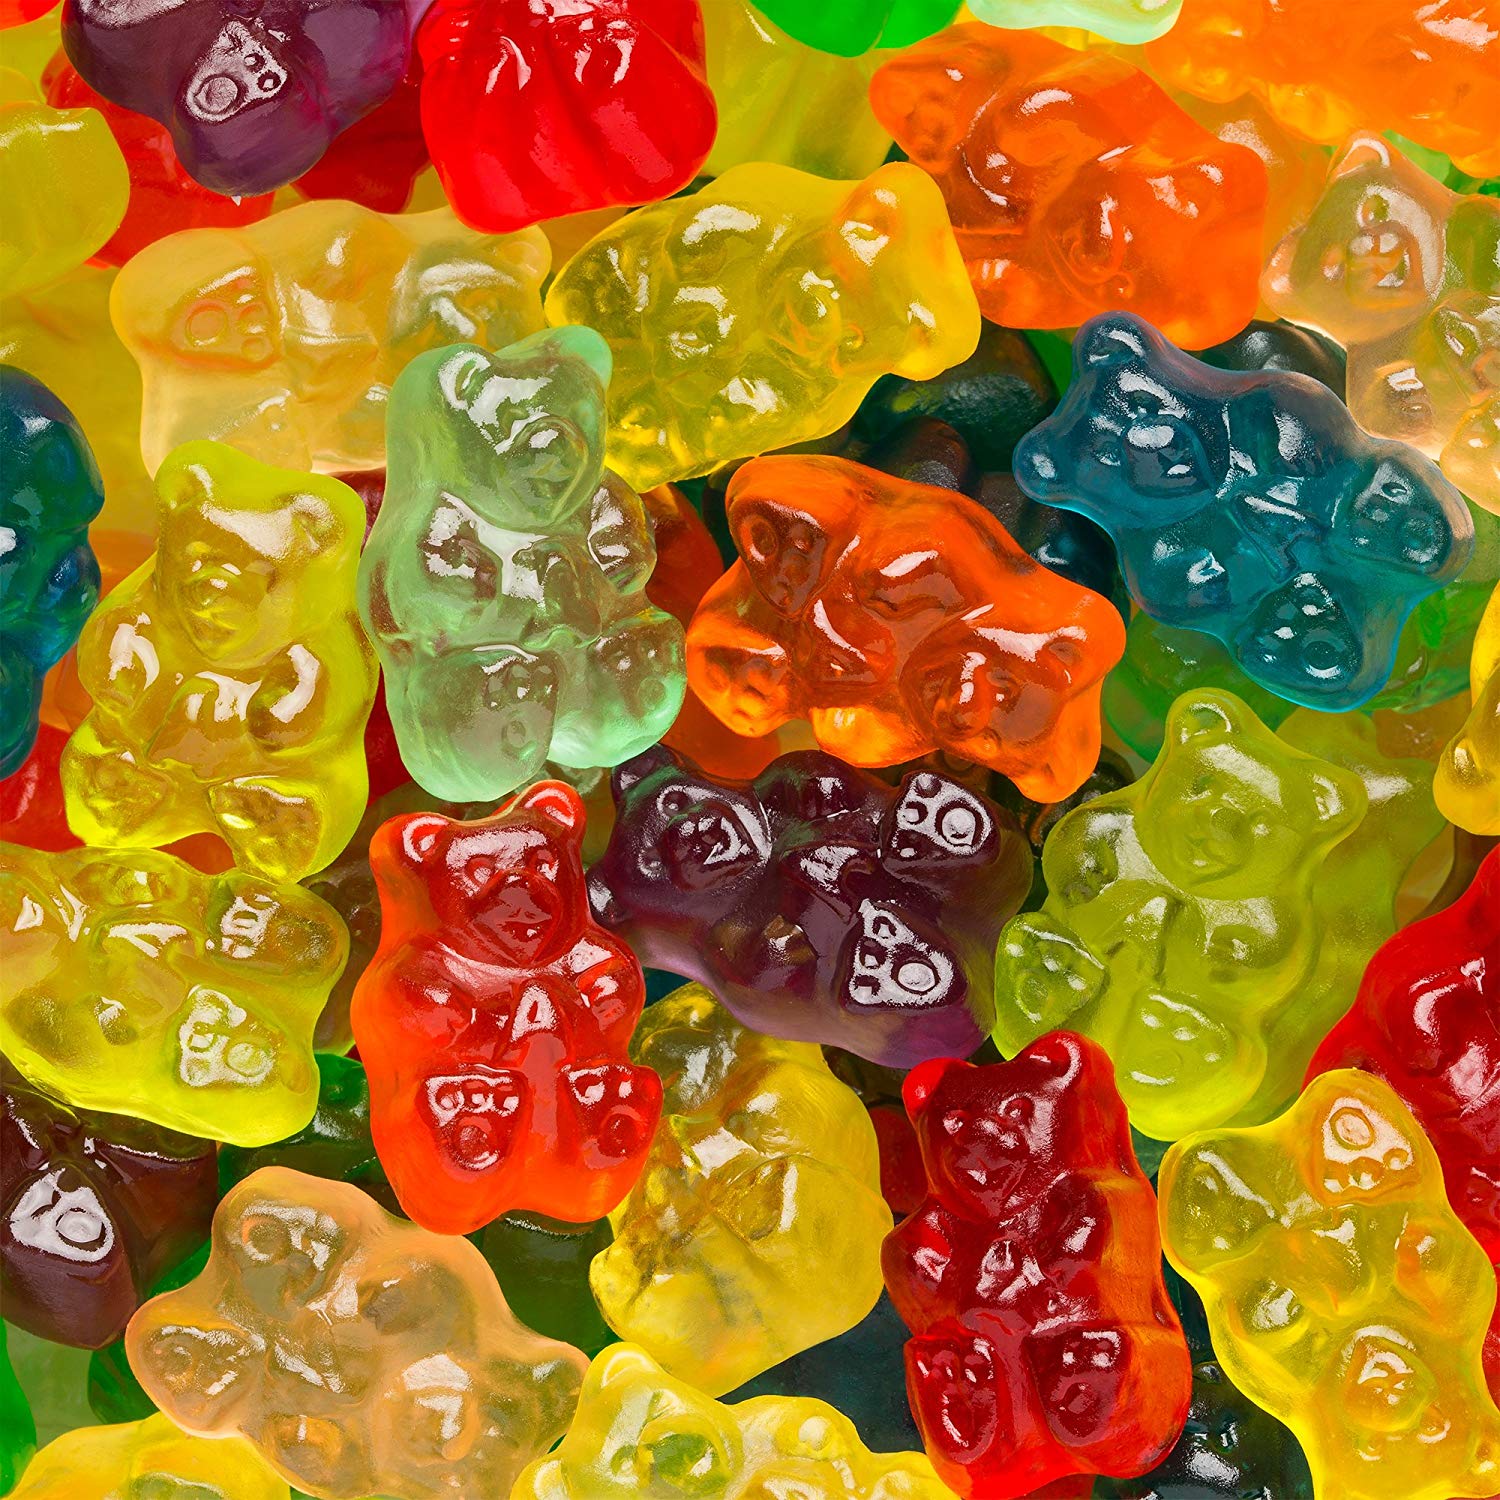 Buy Albanese Candy Gummi Bears 5 Lb Special Discount And Free Shipping.